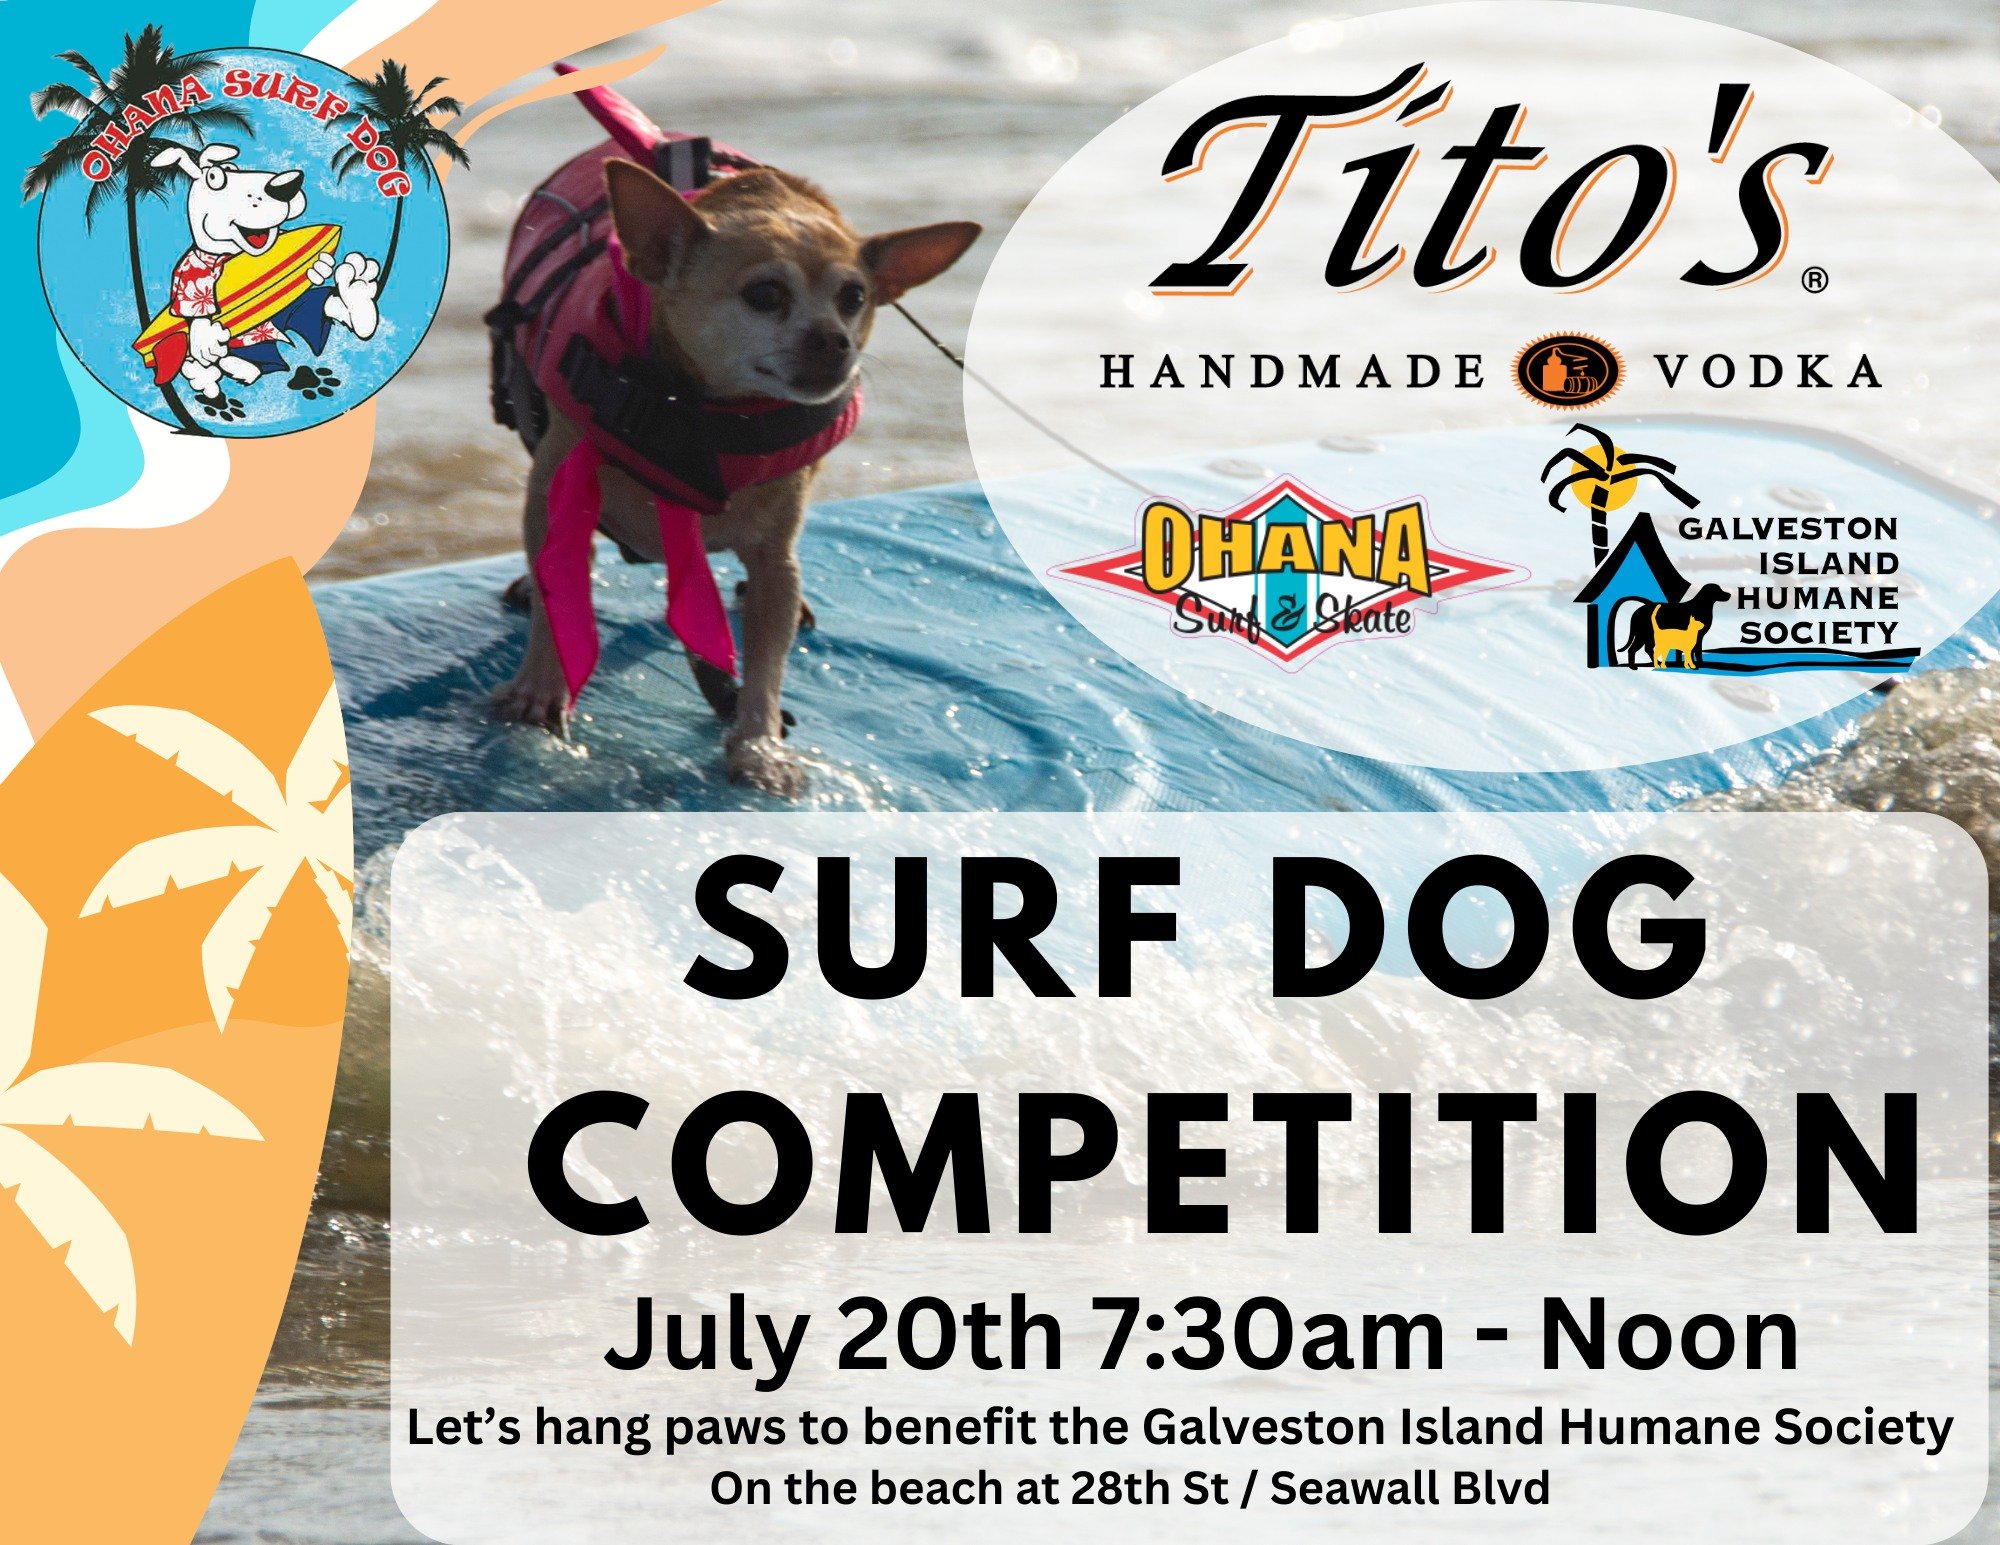 Calling all Surfers and Sponsors! 
The beach is going to the dogs on July 20th for our 11th annual Surf Dog competition. 
Check out the event page and register your surfer, reserve your shirt or tank top or trucker hat now. You can also register as a